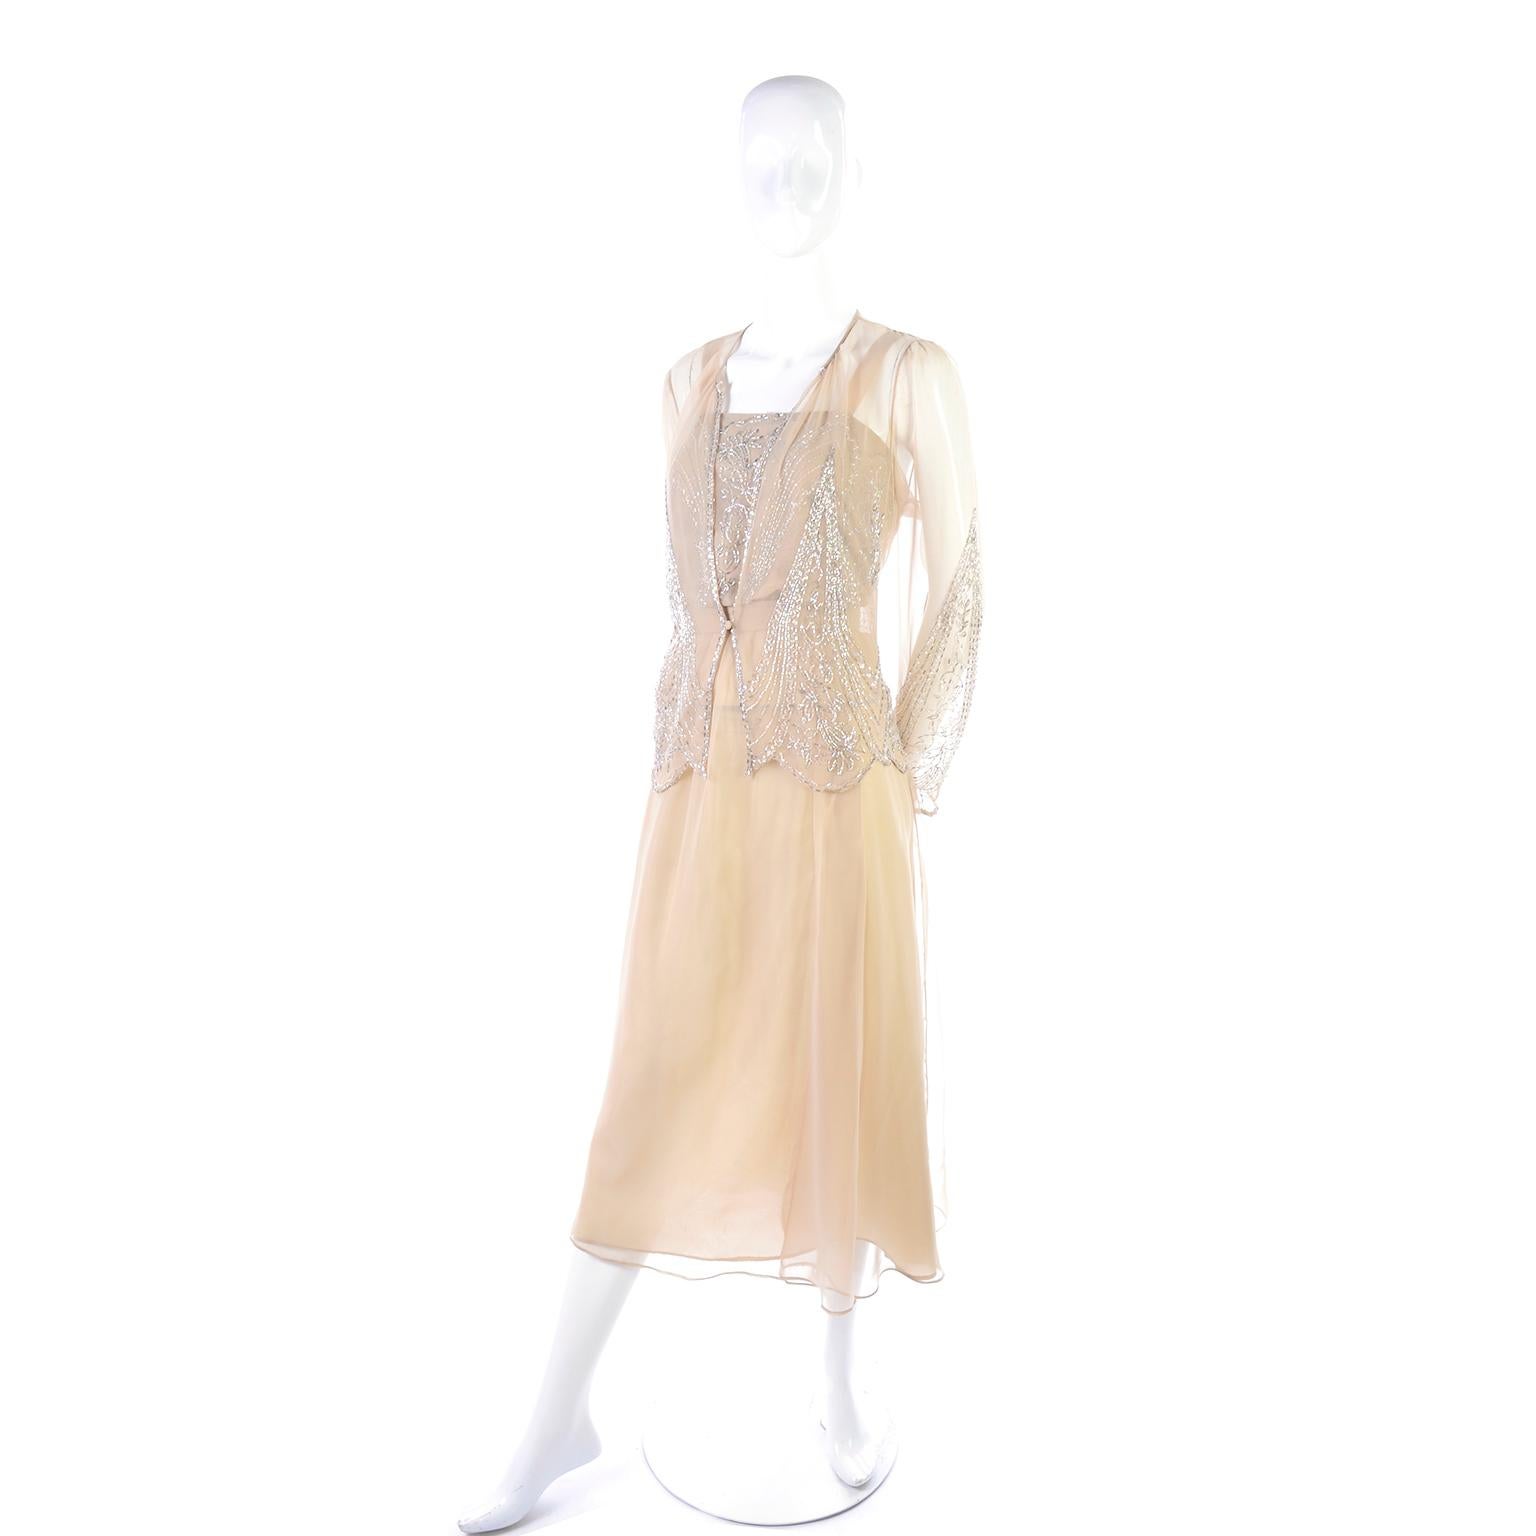 This is a gorgeous vintage Jack Bryan sand/tan colored dress with a sheer jacket. The dress is taffeta with a sheer chiffon overlay and sleeveless with beautiful beading on the bodice and an elastic waist. There is a belt that secures with hook and